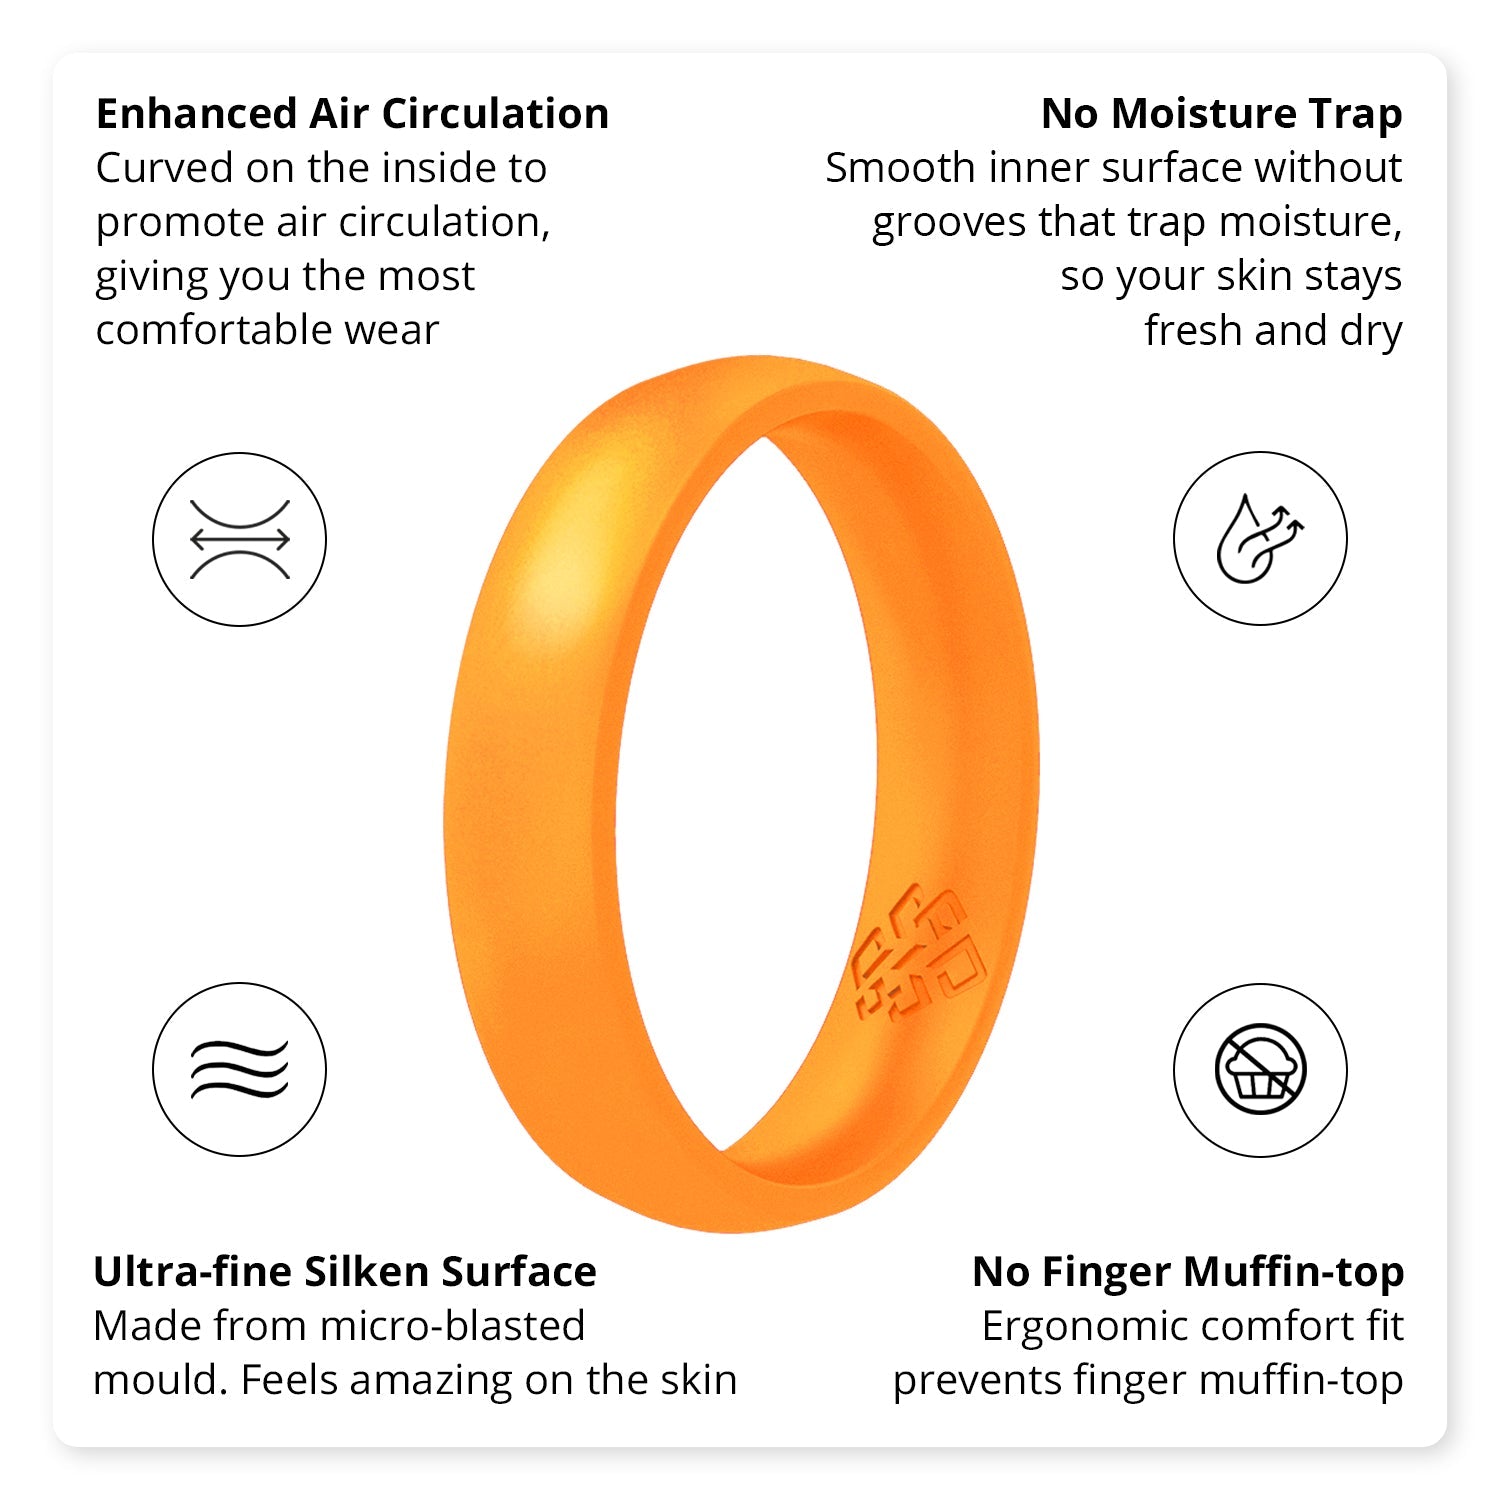 Pearl Orange Breathable Silicone Ring for Women - Knot Theory